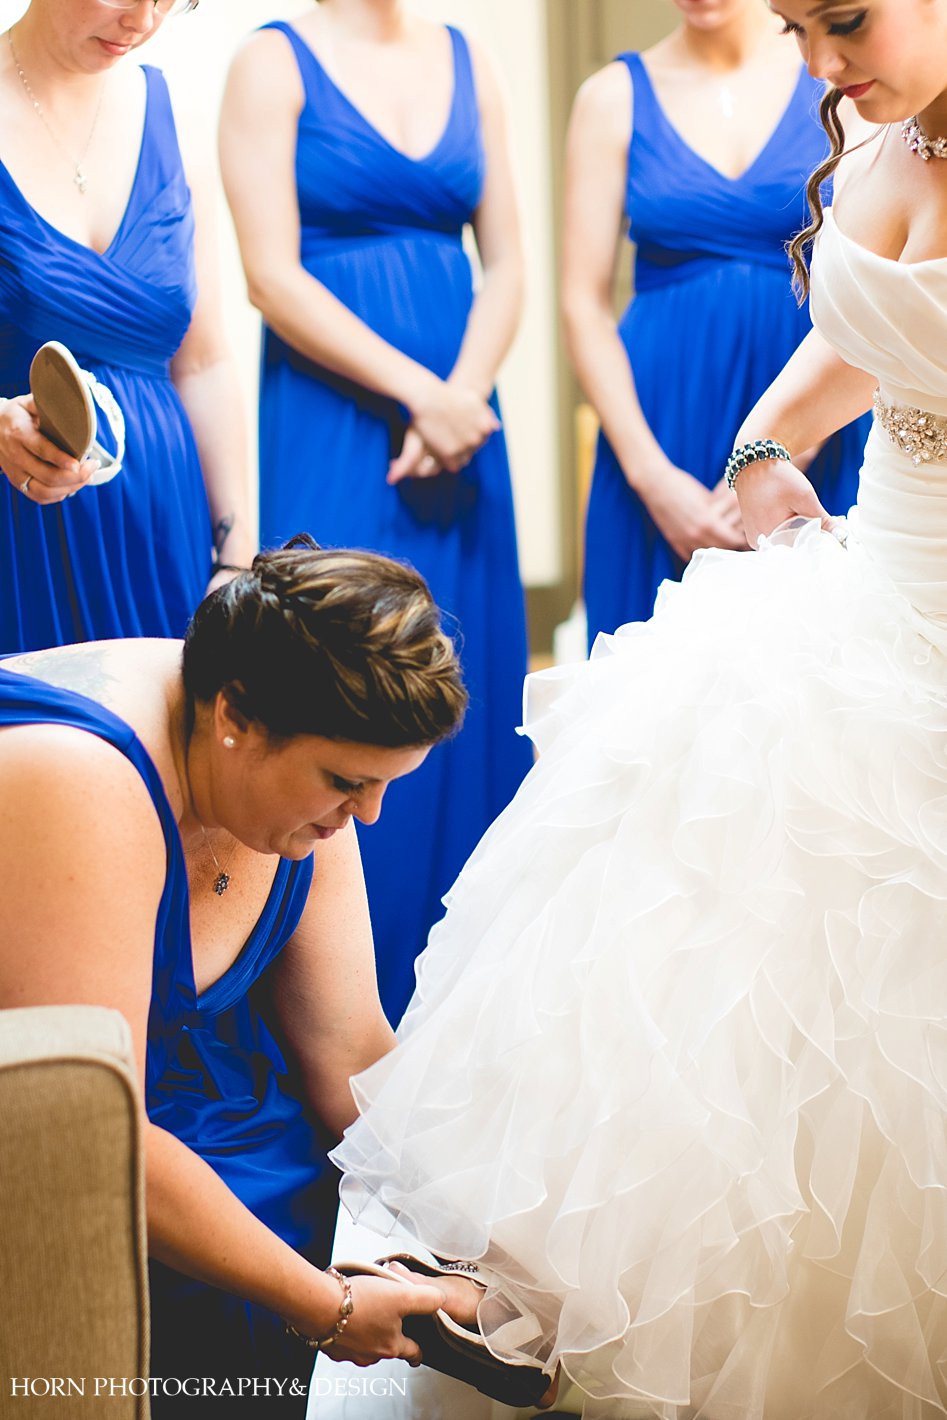 Bride getting ready photos with blue bridesmaids dresses